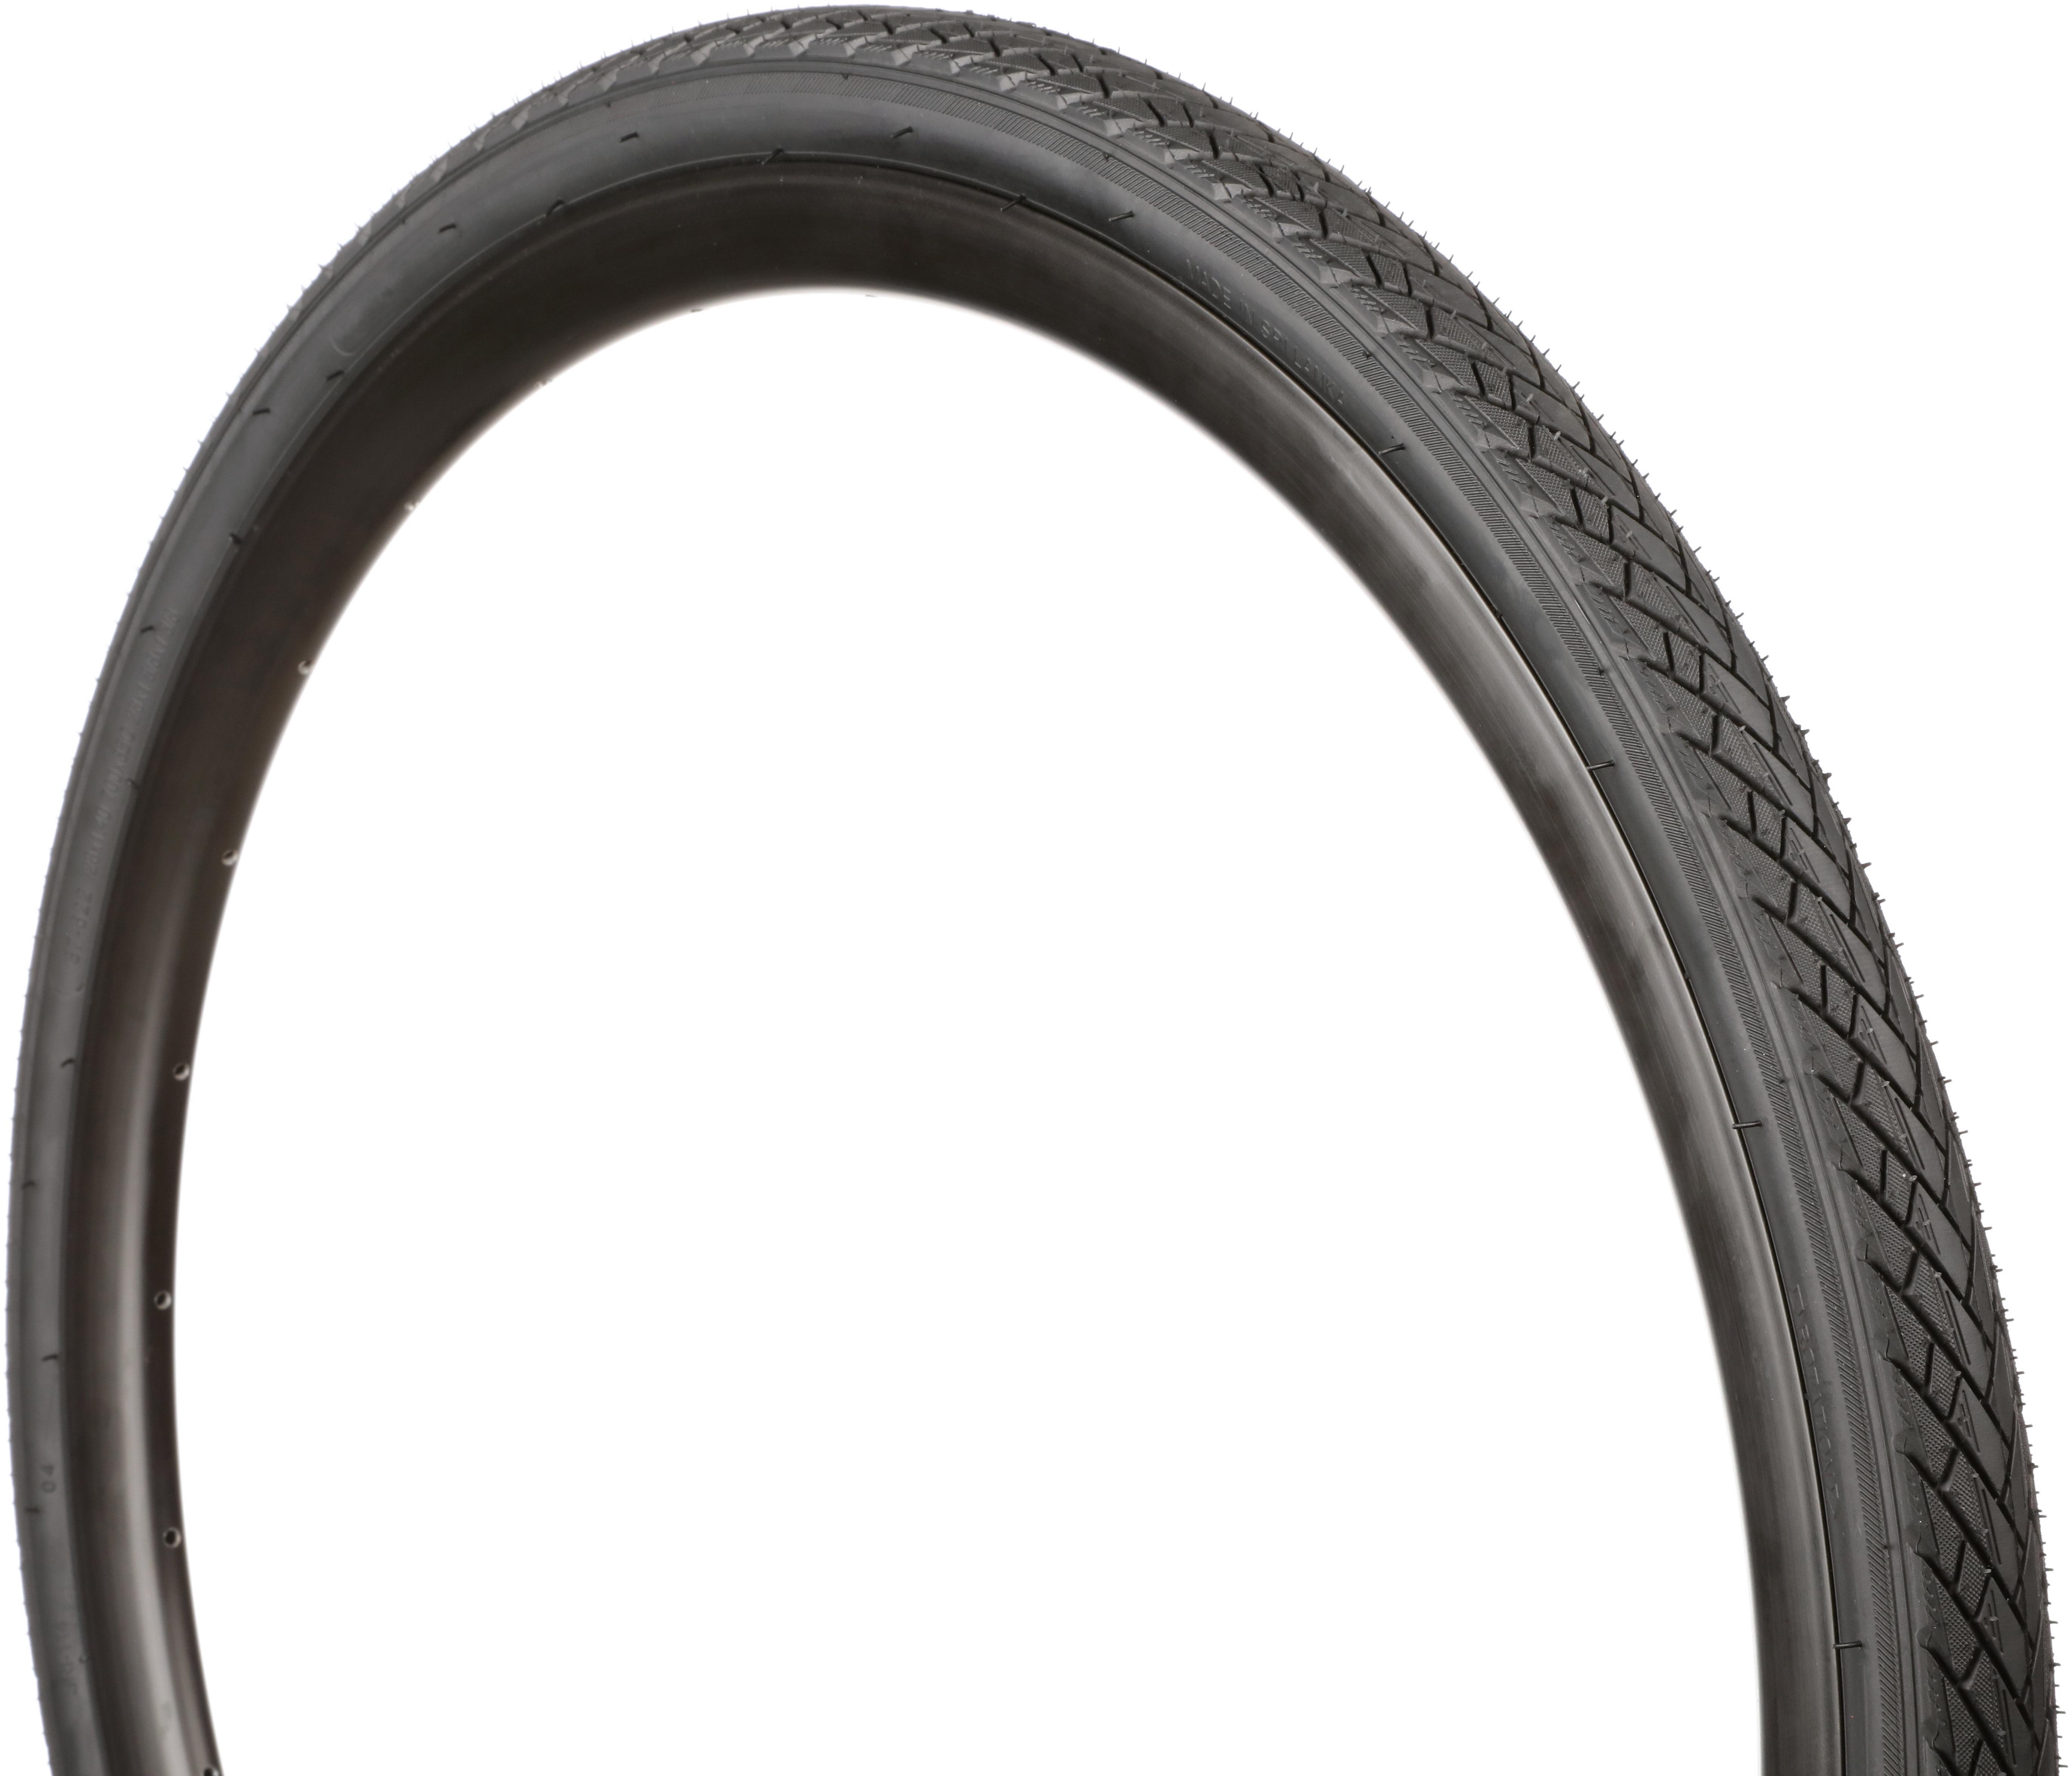 Halfords Hybrid Bike Tyre 700C X 35C With Puncture Protect